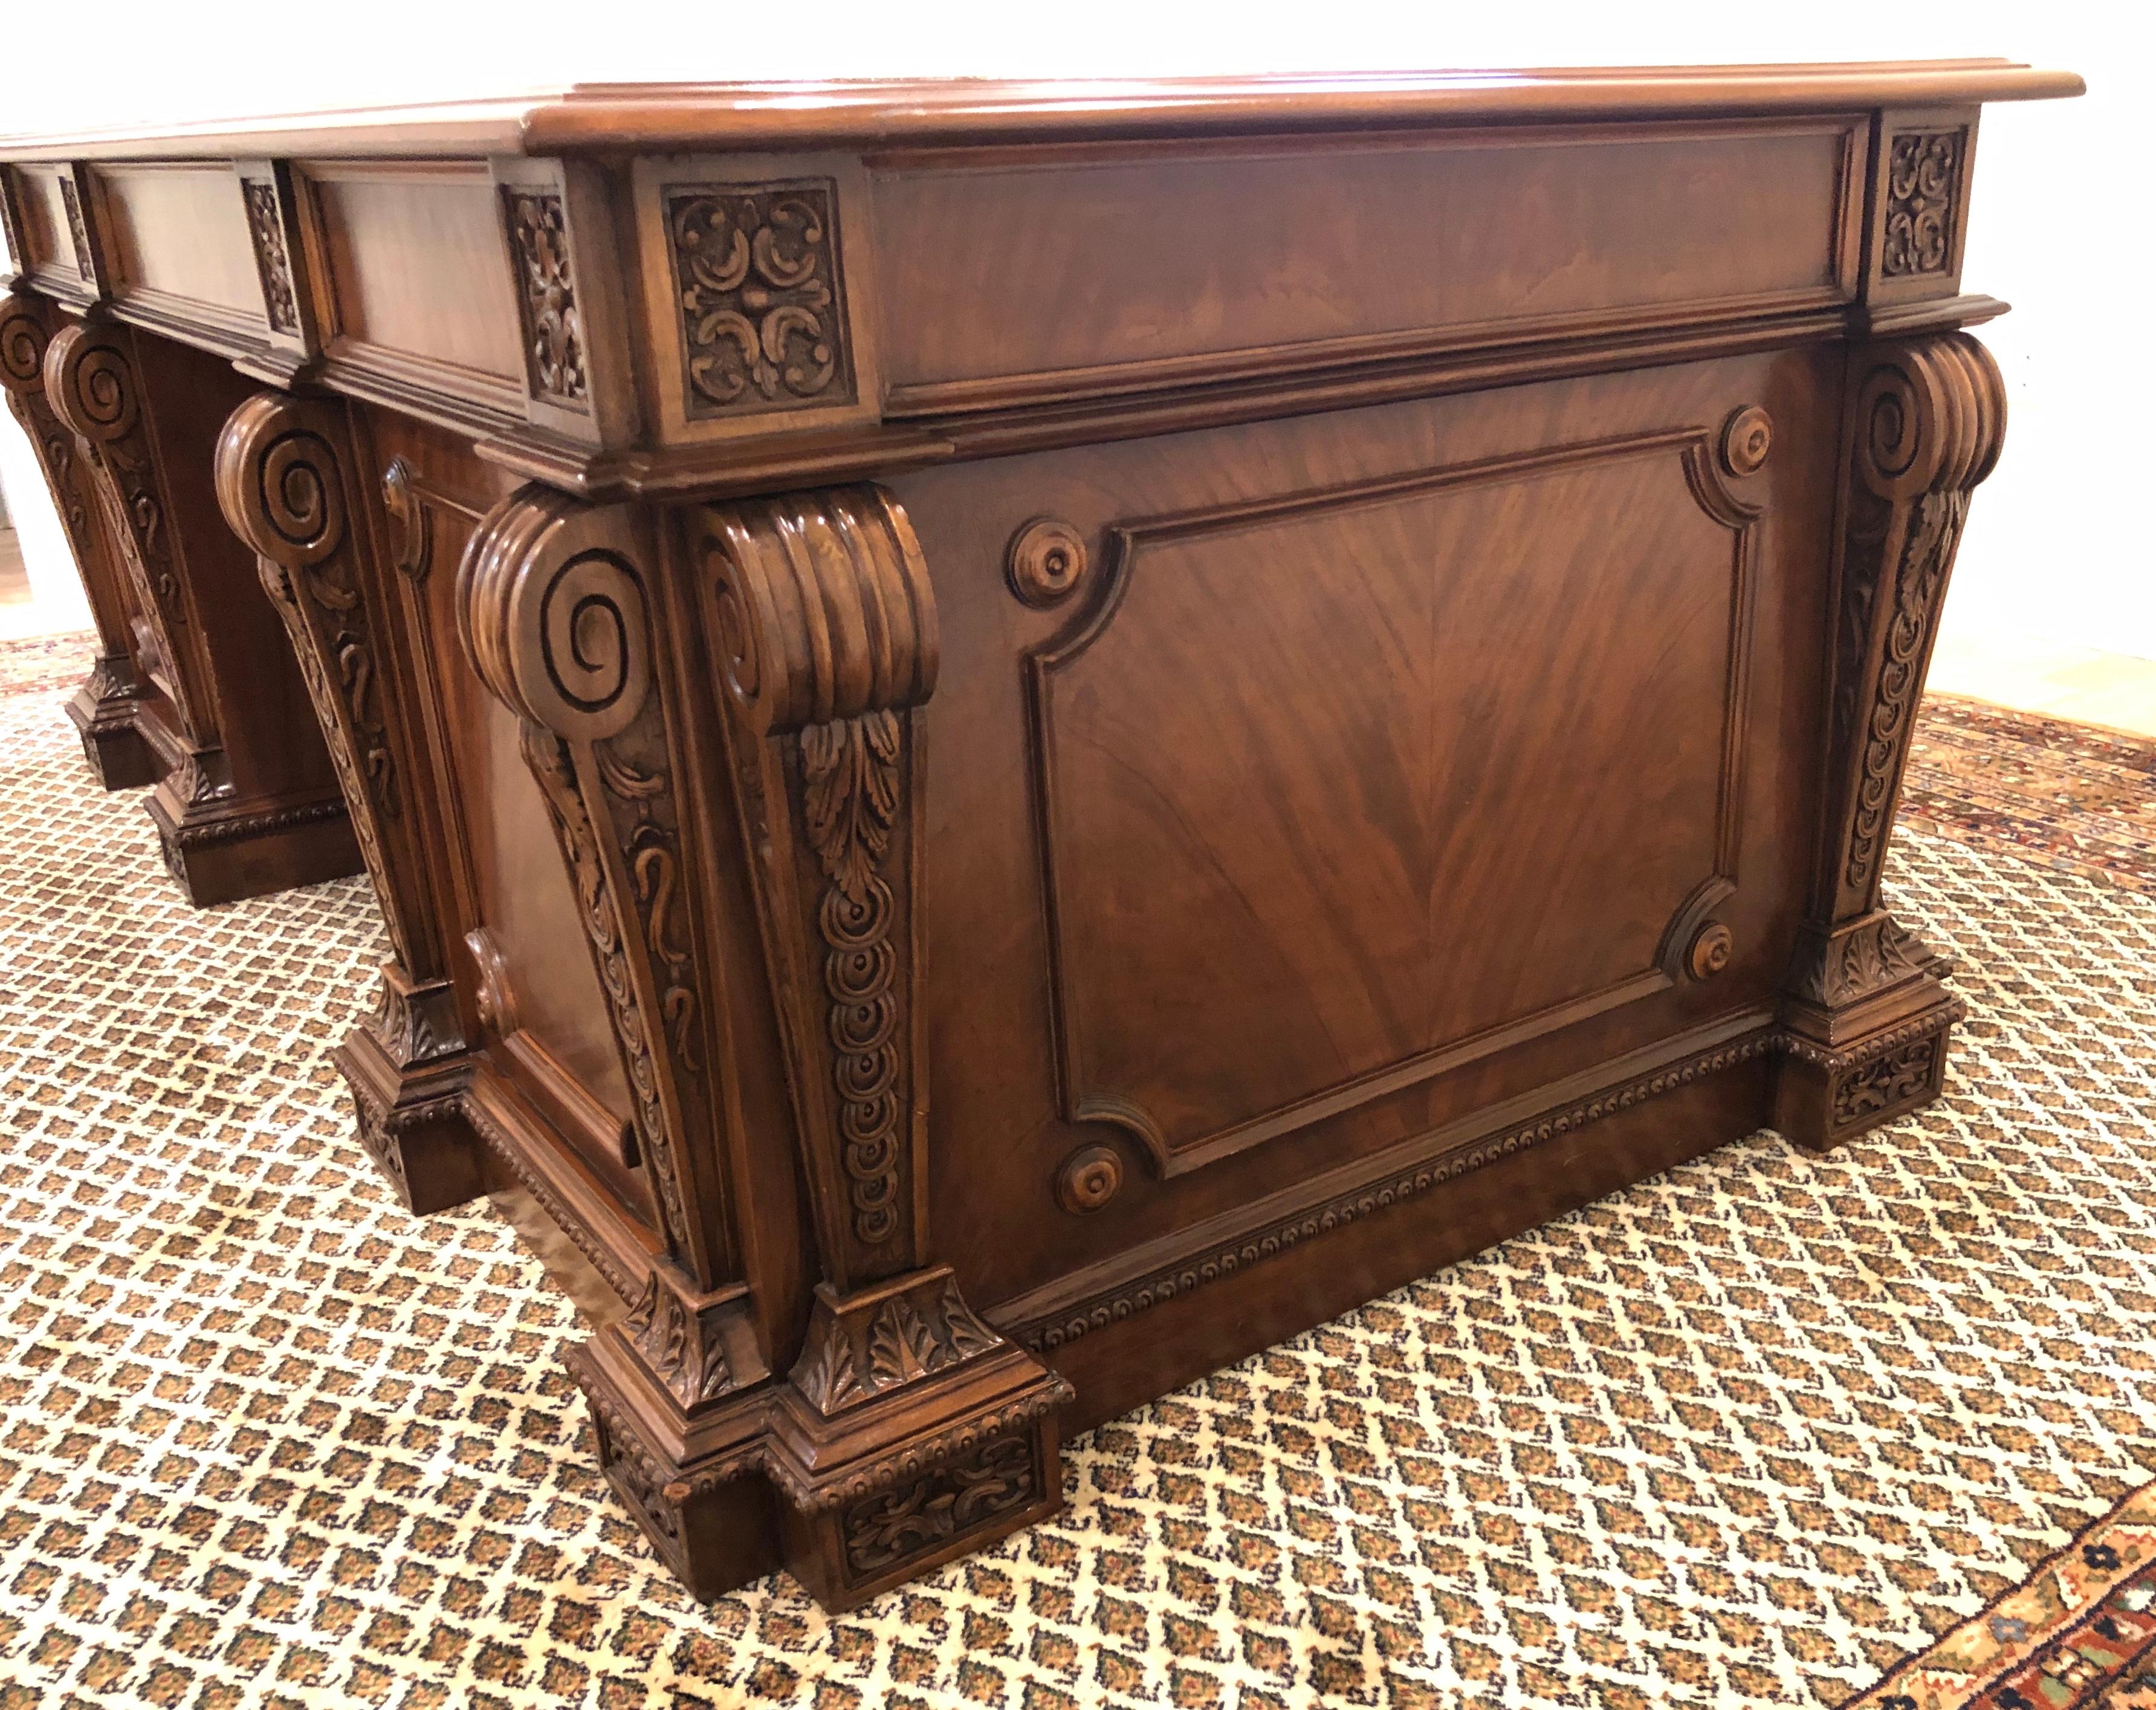 Late 20th Century Regency Mahogany Twin Pedestal Desk with Gold Tooled Leather Top